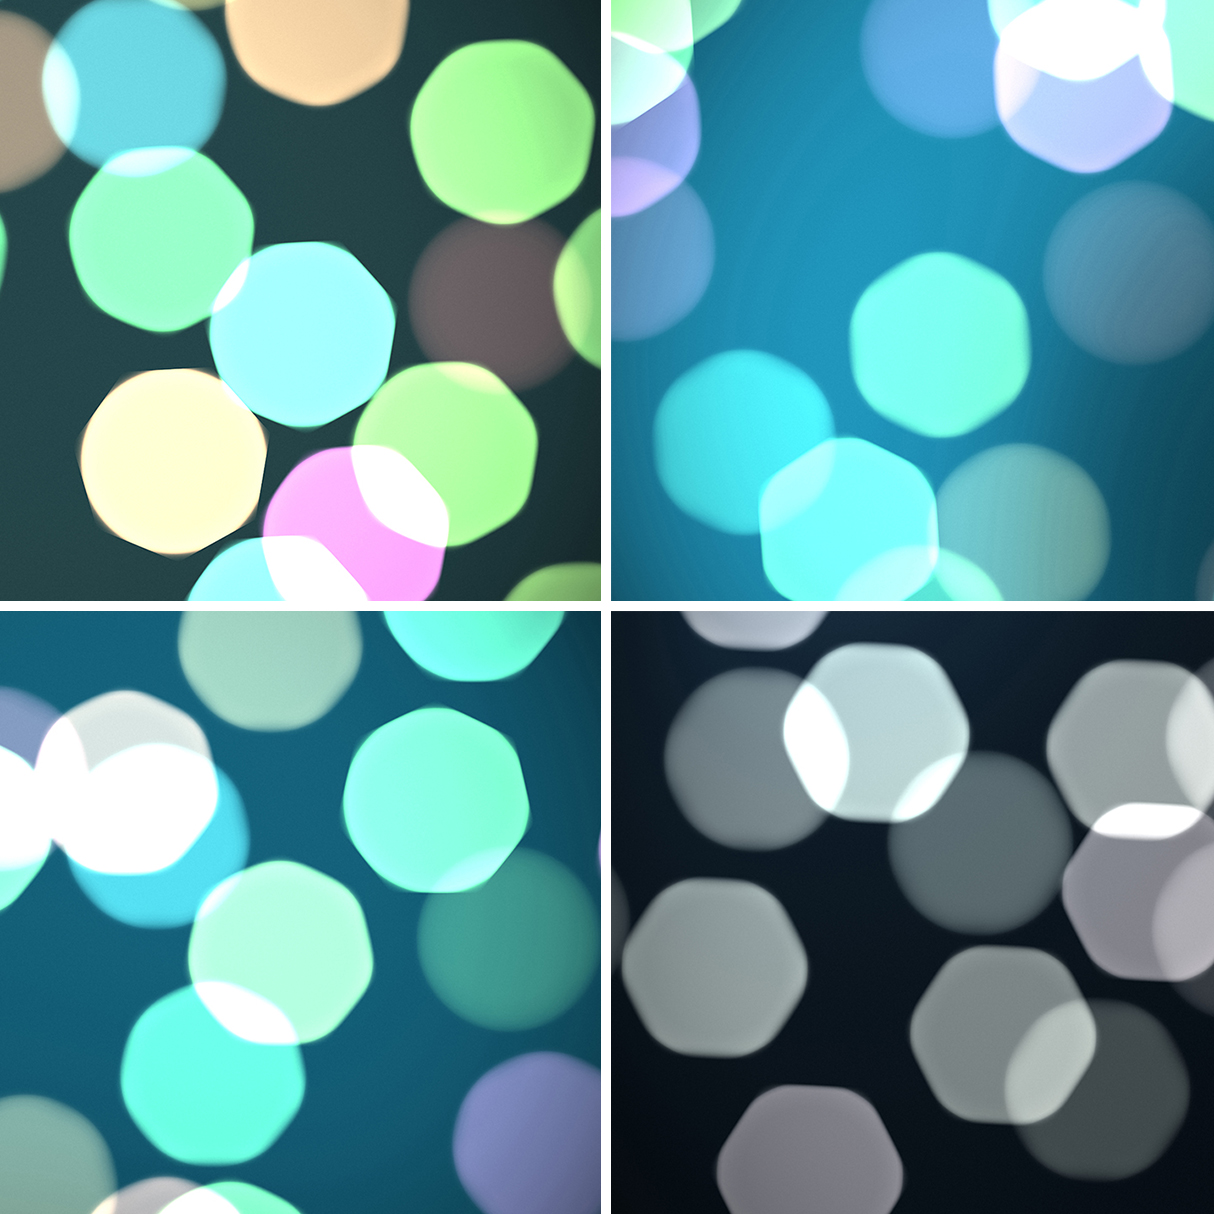 50 Bokeh Pro Backgrounds Samples Preview – Part 3